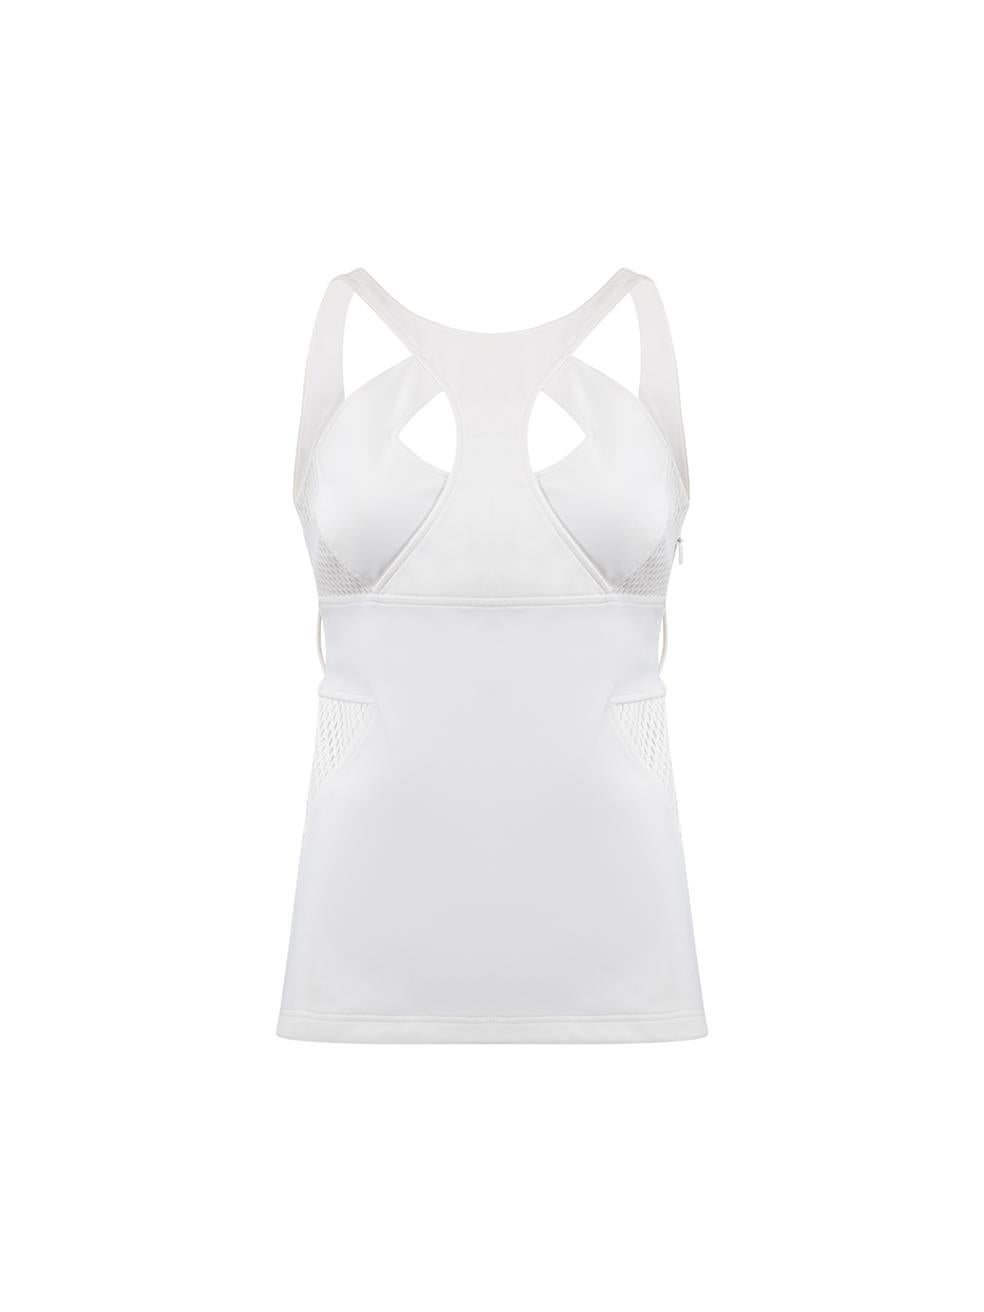 Gucci White Mesh Panel Racer Sleeveless Top Size S For Sale